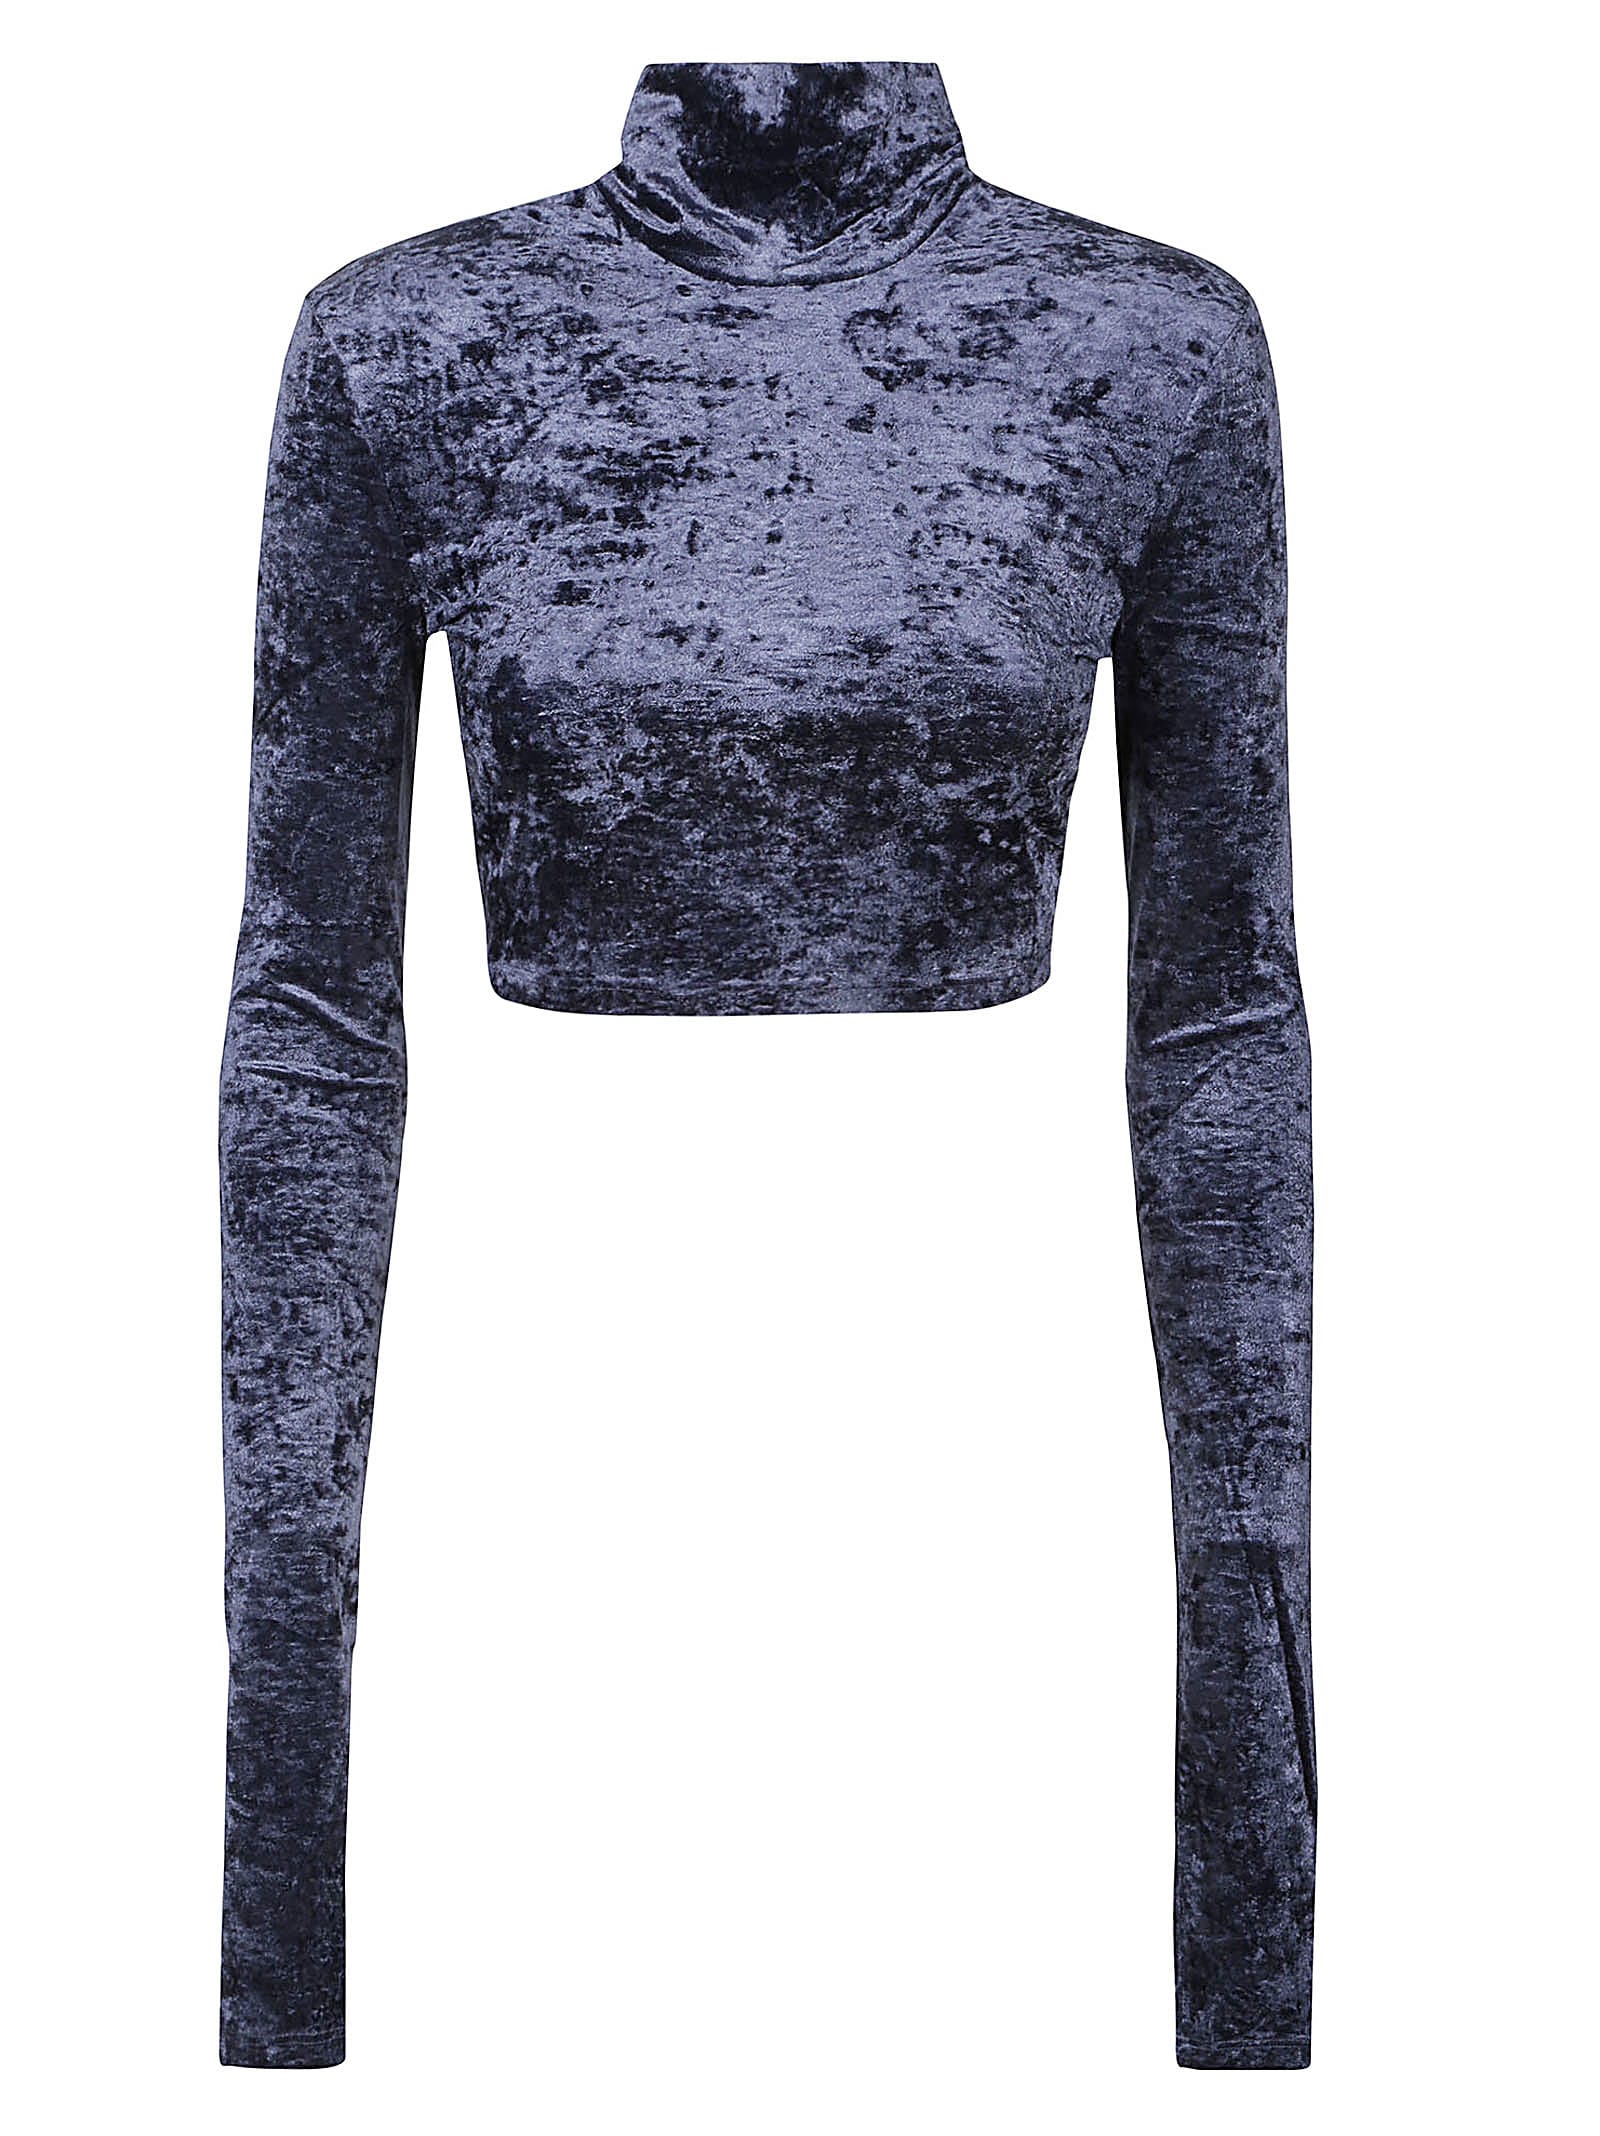 THE ANDAMANE ORCHID TURTLE NECK CROPPED TOP